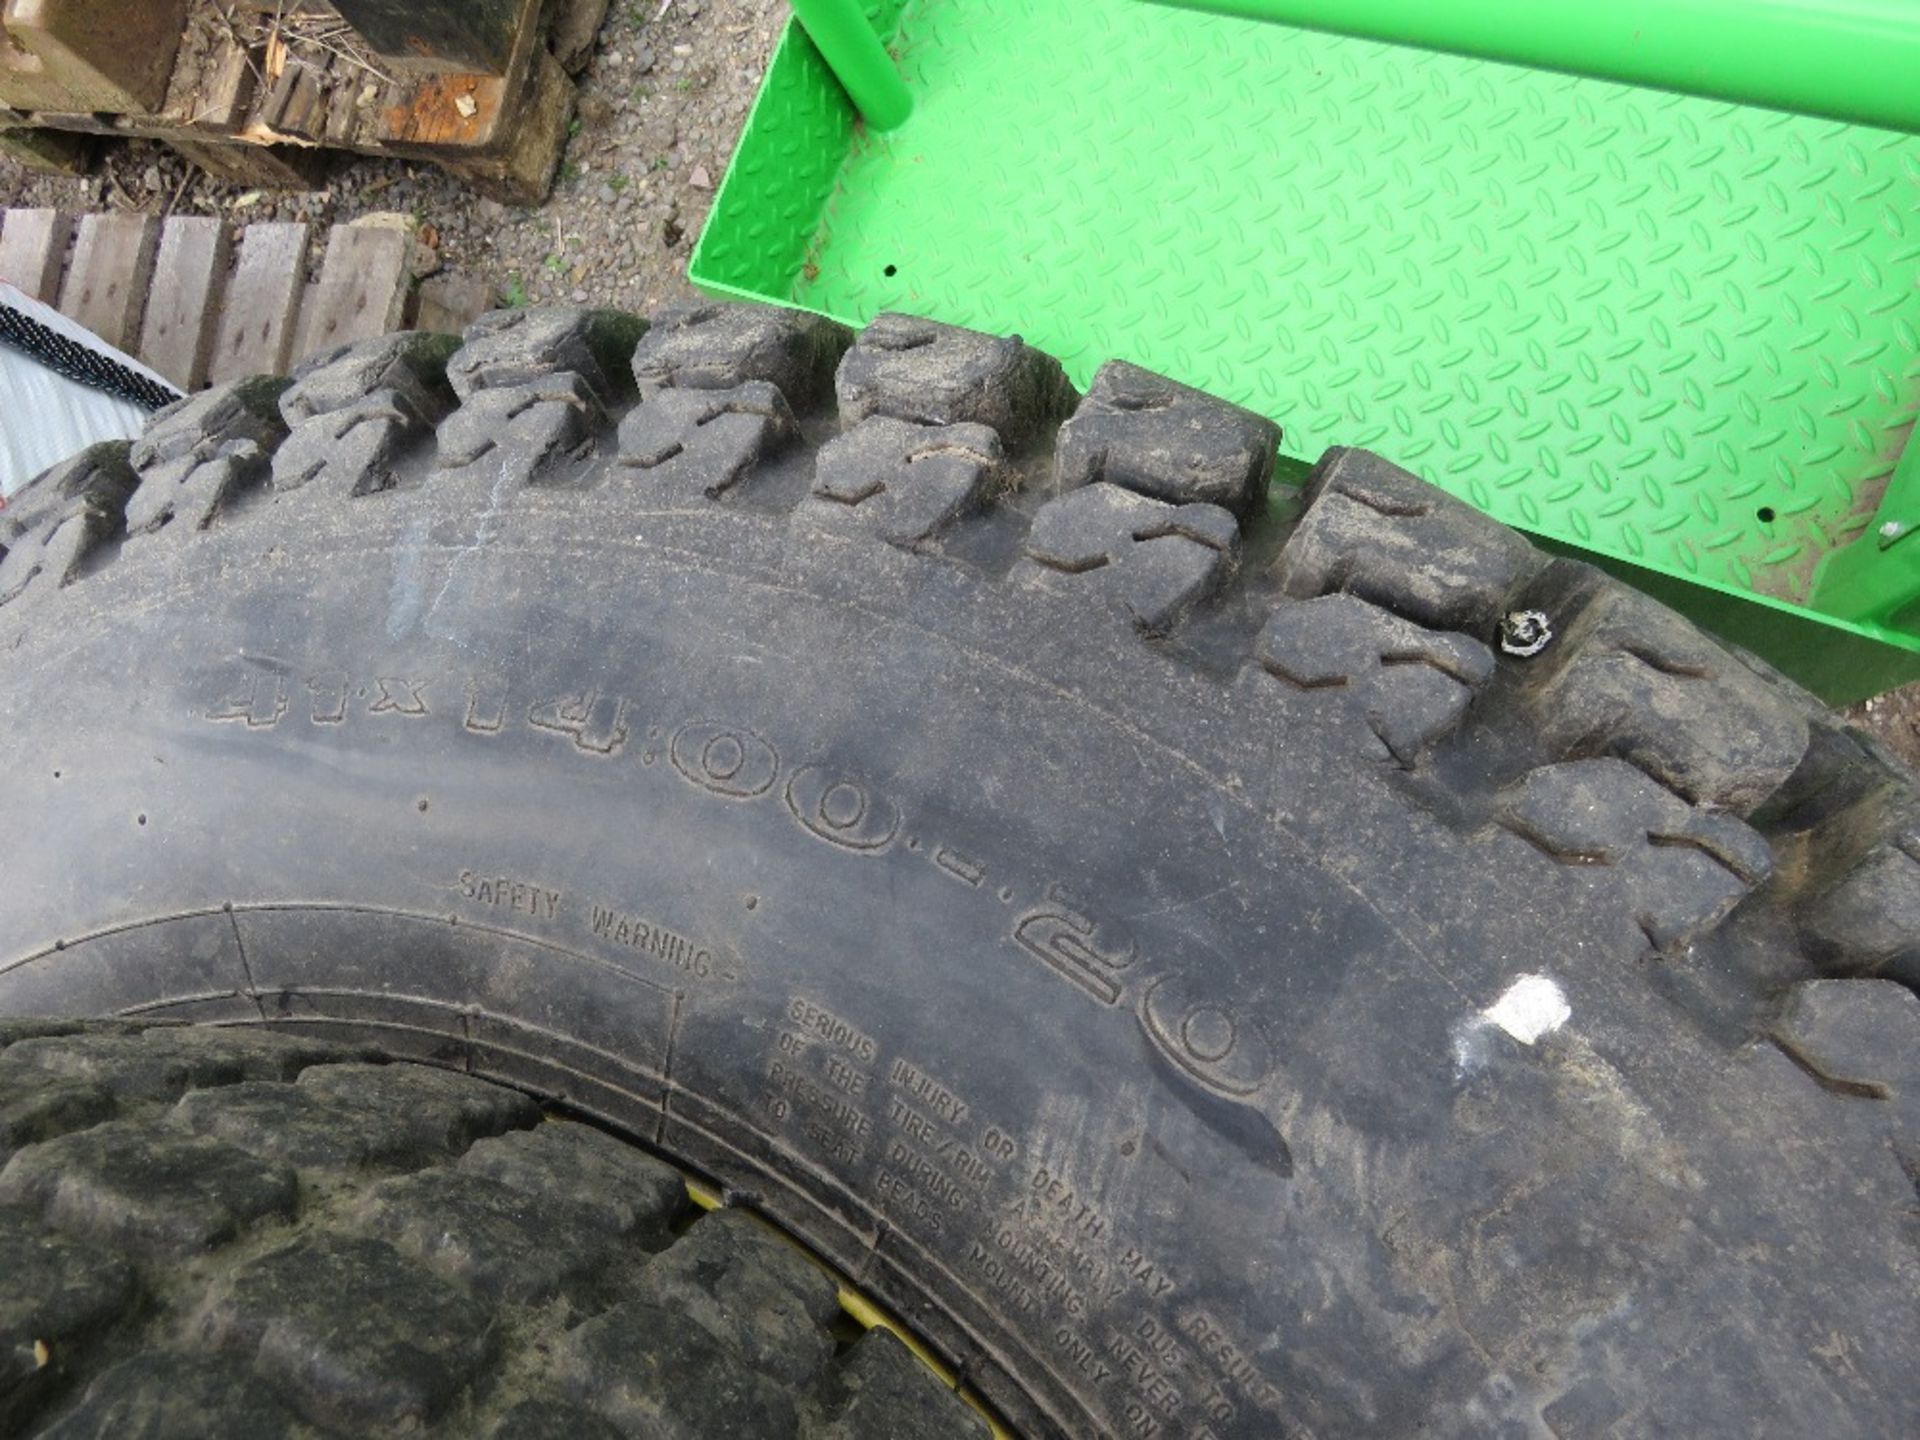 SET OF GRASSLAND WHEELS AND TYRES, BELIVED FROM JOHN DEERE TRACTOR. 2@41X14.00-20 PLUS 2@ 27X8.50-15 - Image 4 of 5